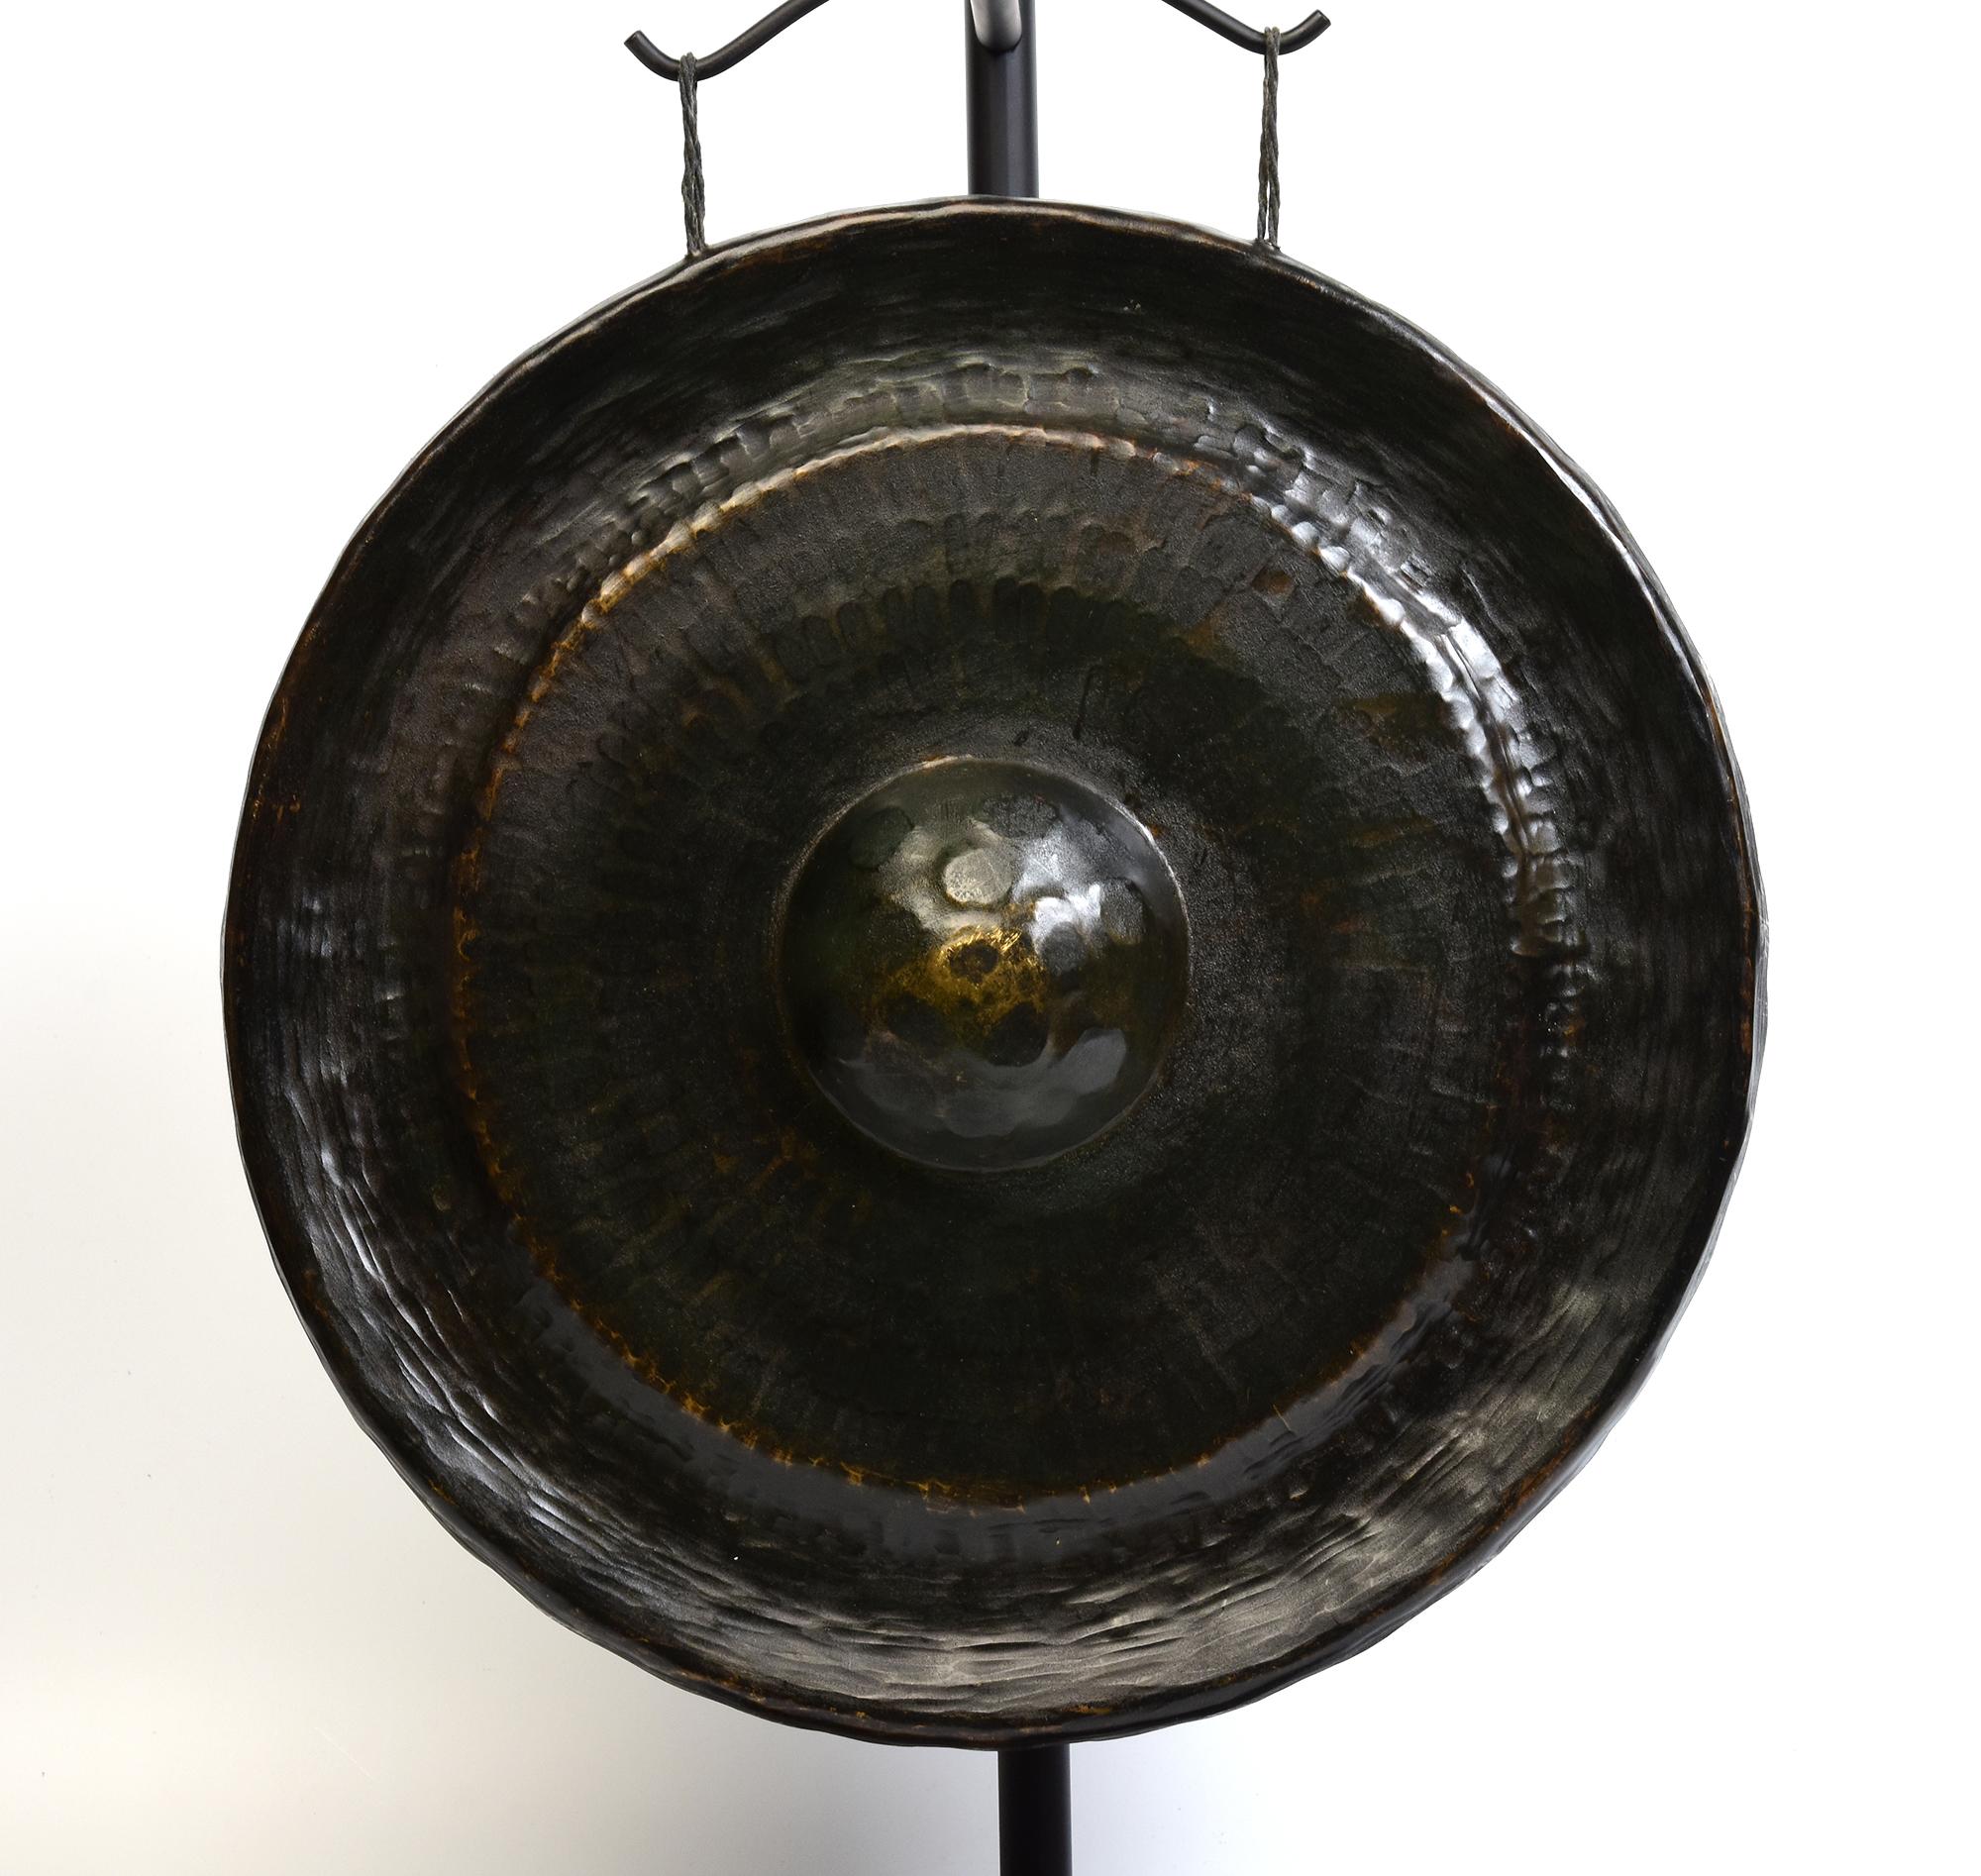 Antique Laos bronze gong, a kind of Laos musical instrument which produces a loud and sonorous sound. Gong stick is included.

Age: Laos, 19th Century
Size of gong only: Diameter 40 C.M. / Thickness 9.5 C.M.
Height including stand: 59